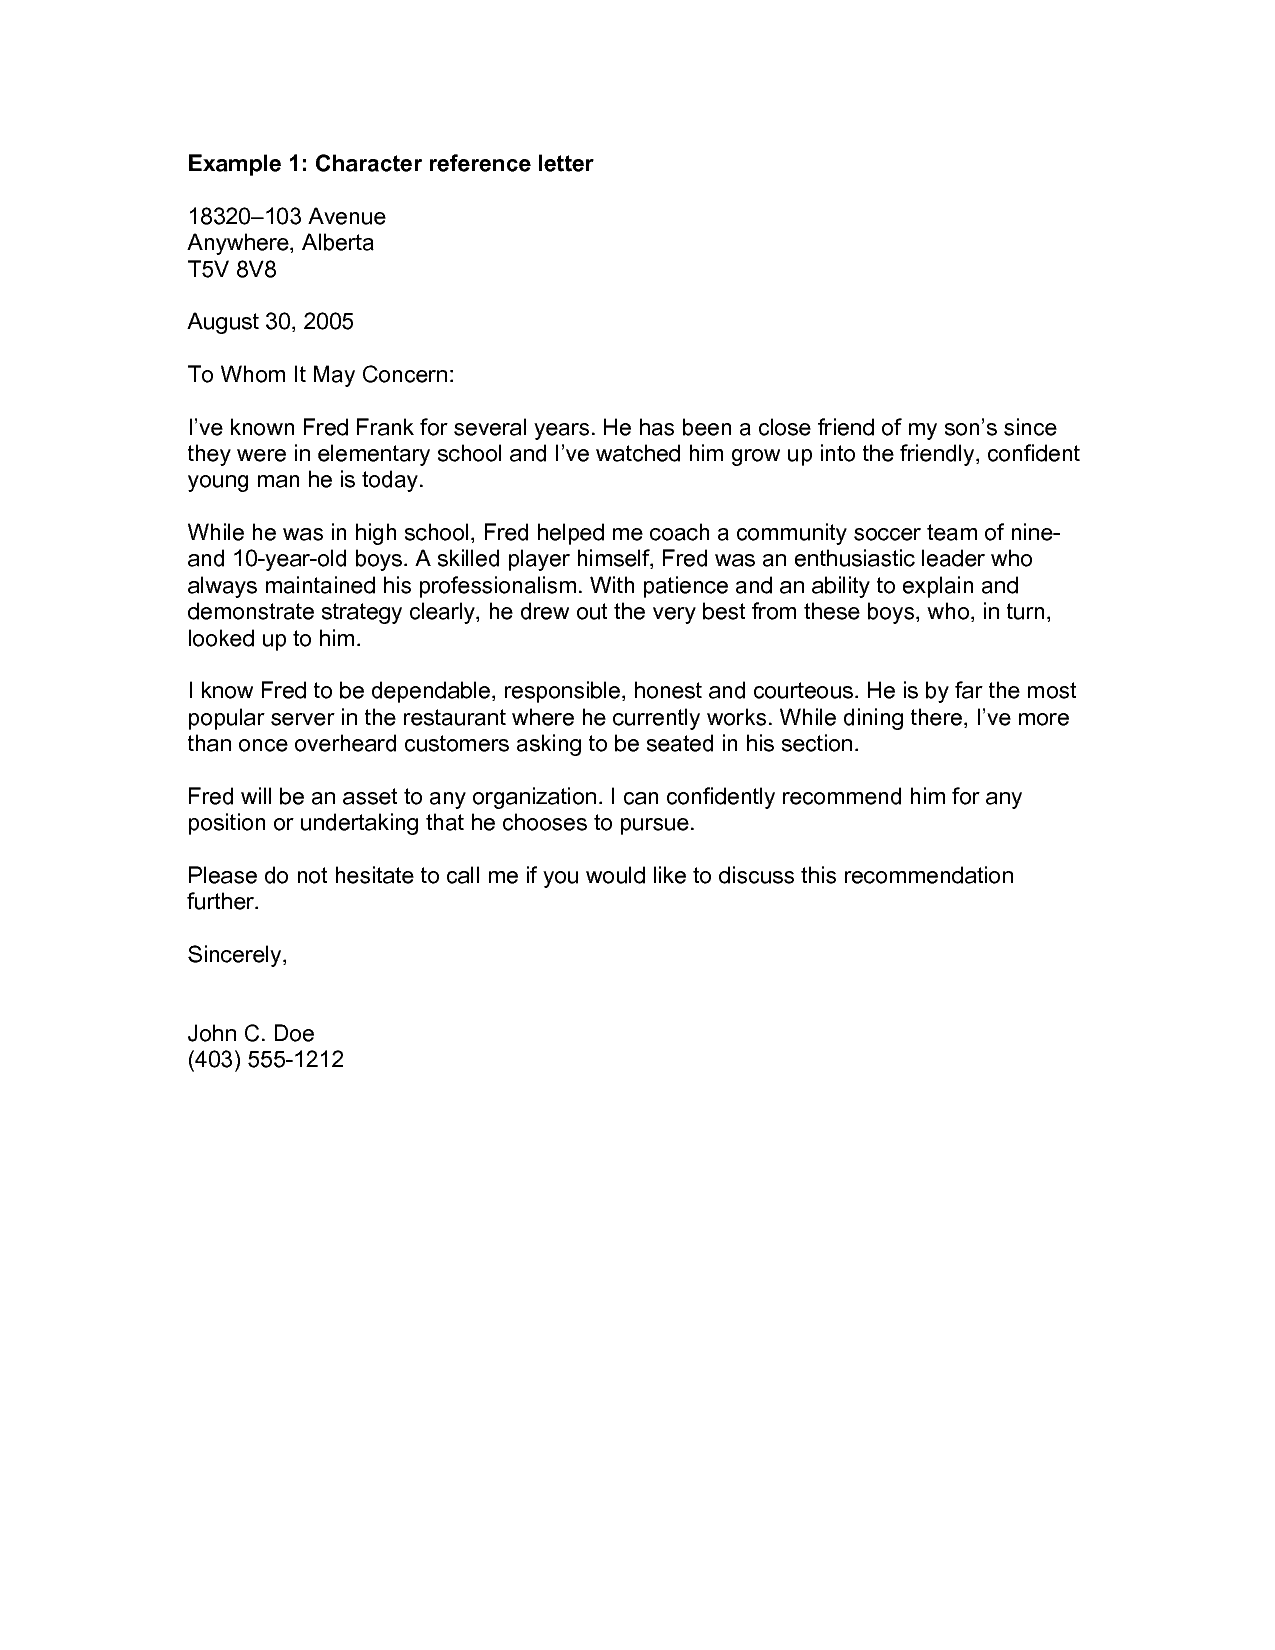 Character Reference Letter For A Friend Business Mentor